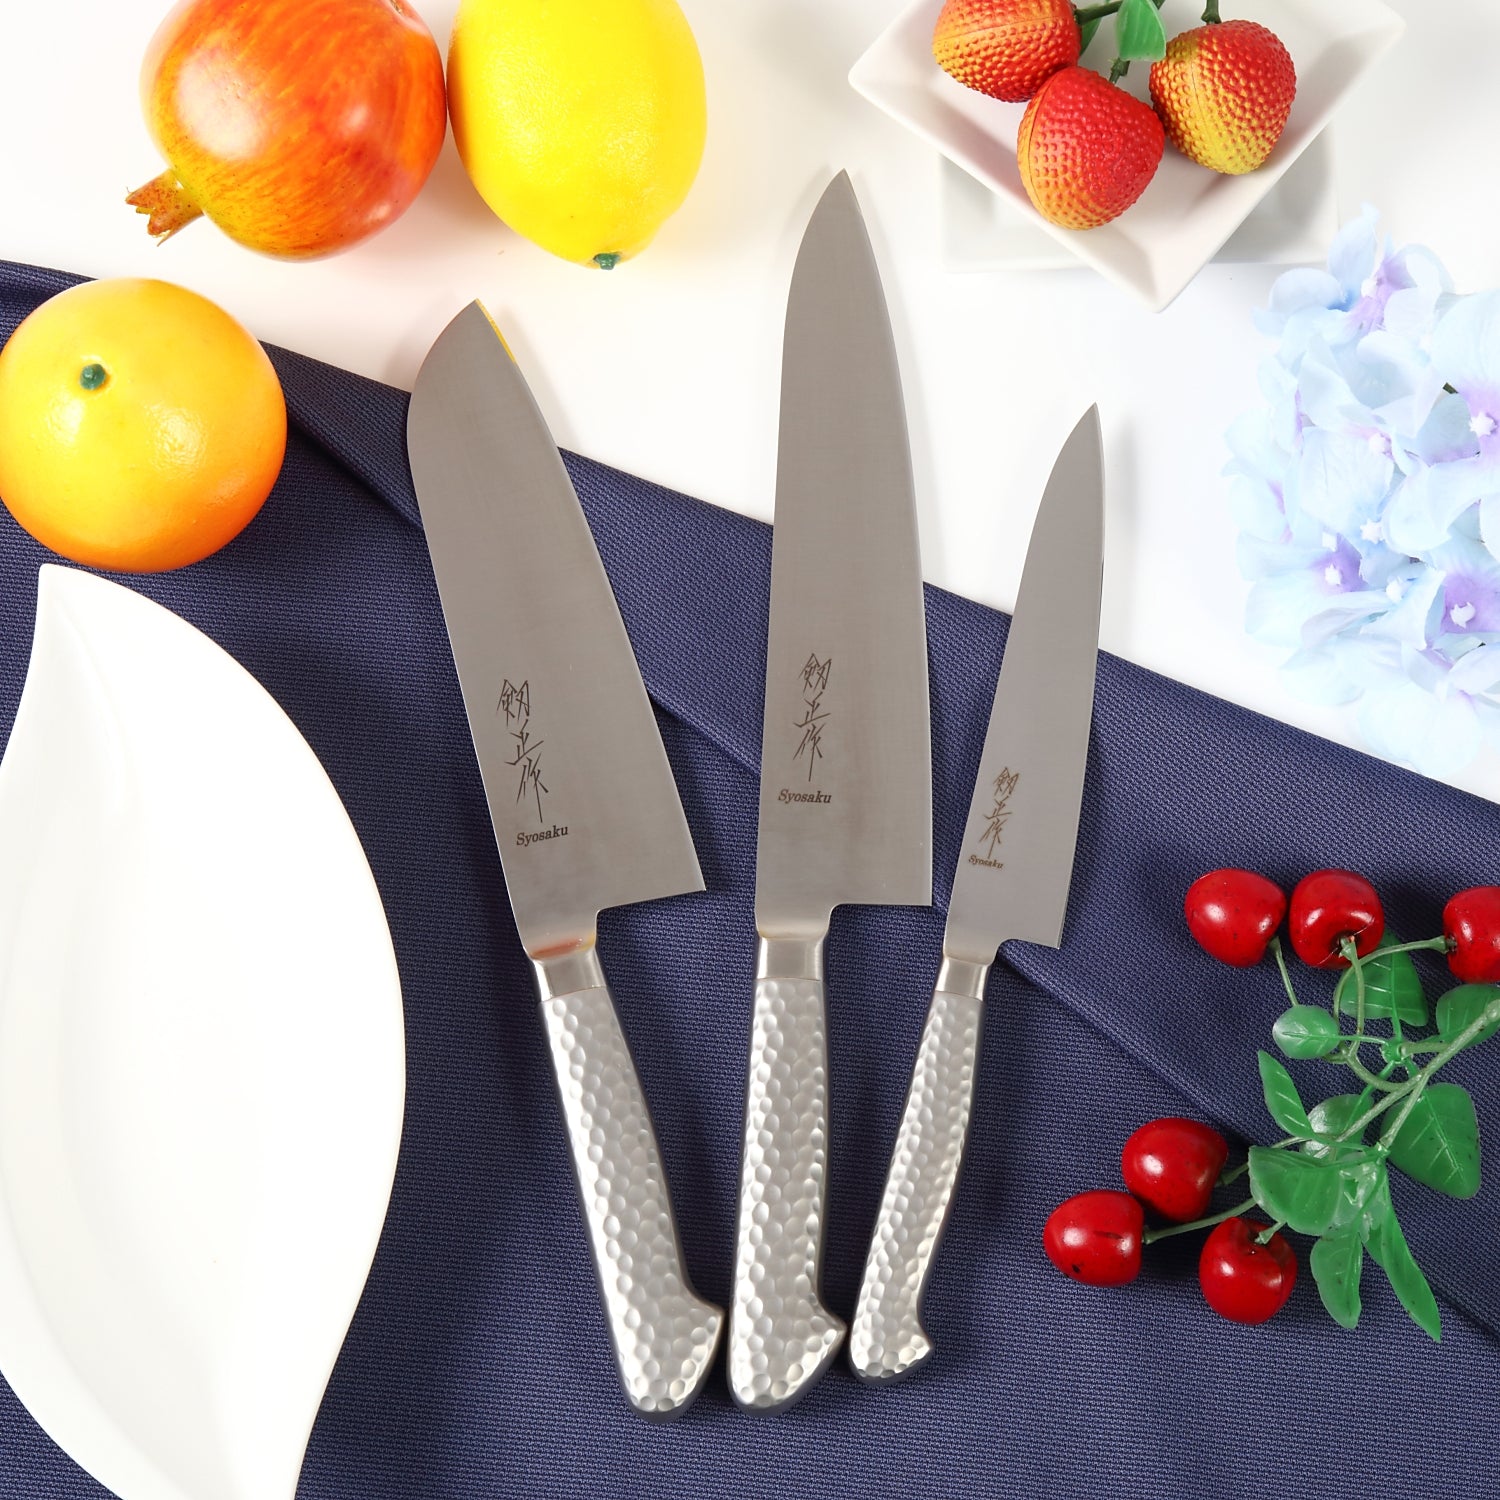 Syosaku Japanese Best Sharp Kitchen Chef Knife INOX AUS-8A Stainless Steel Integrated Handle, Gyuto 8.3-inch (210mm)